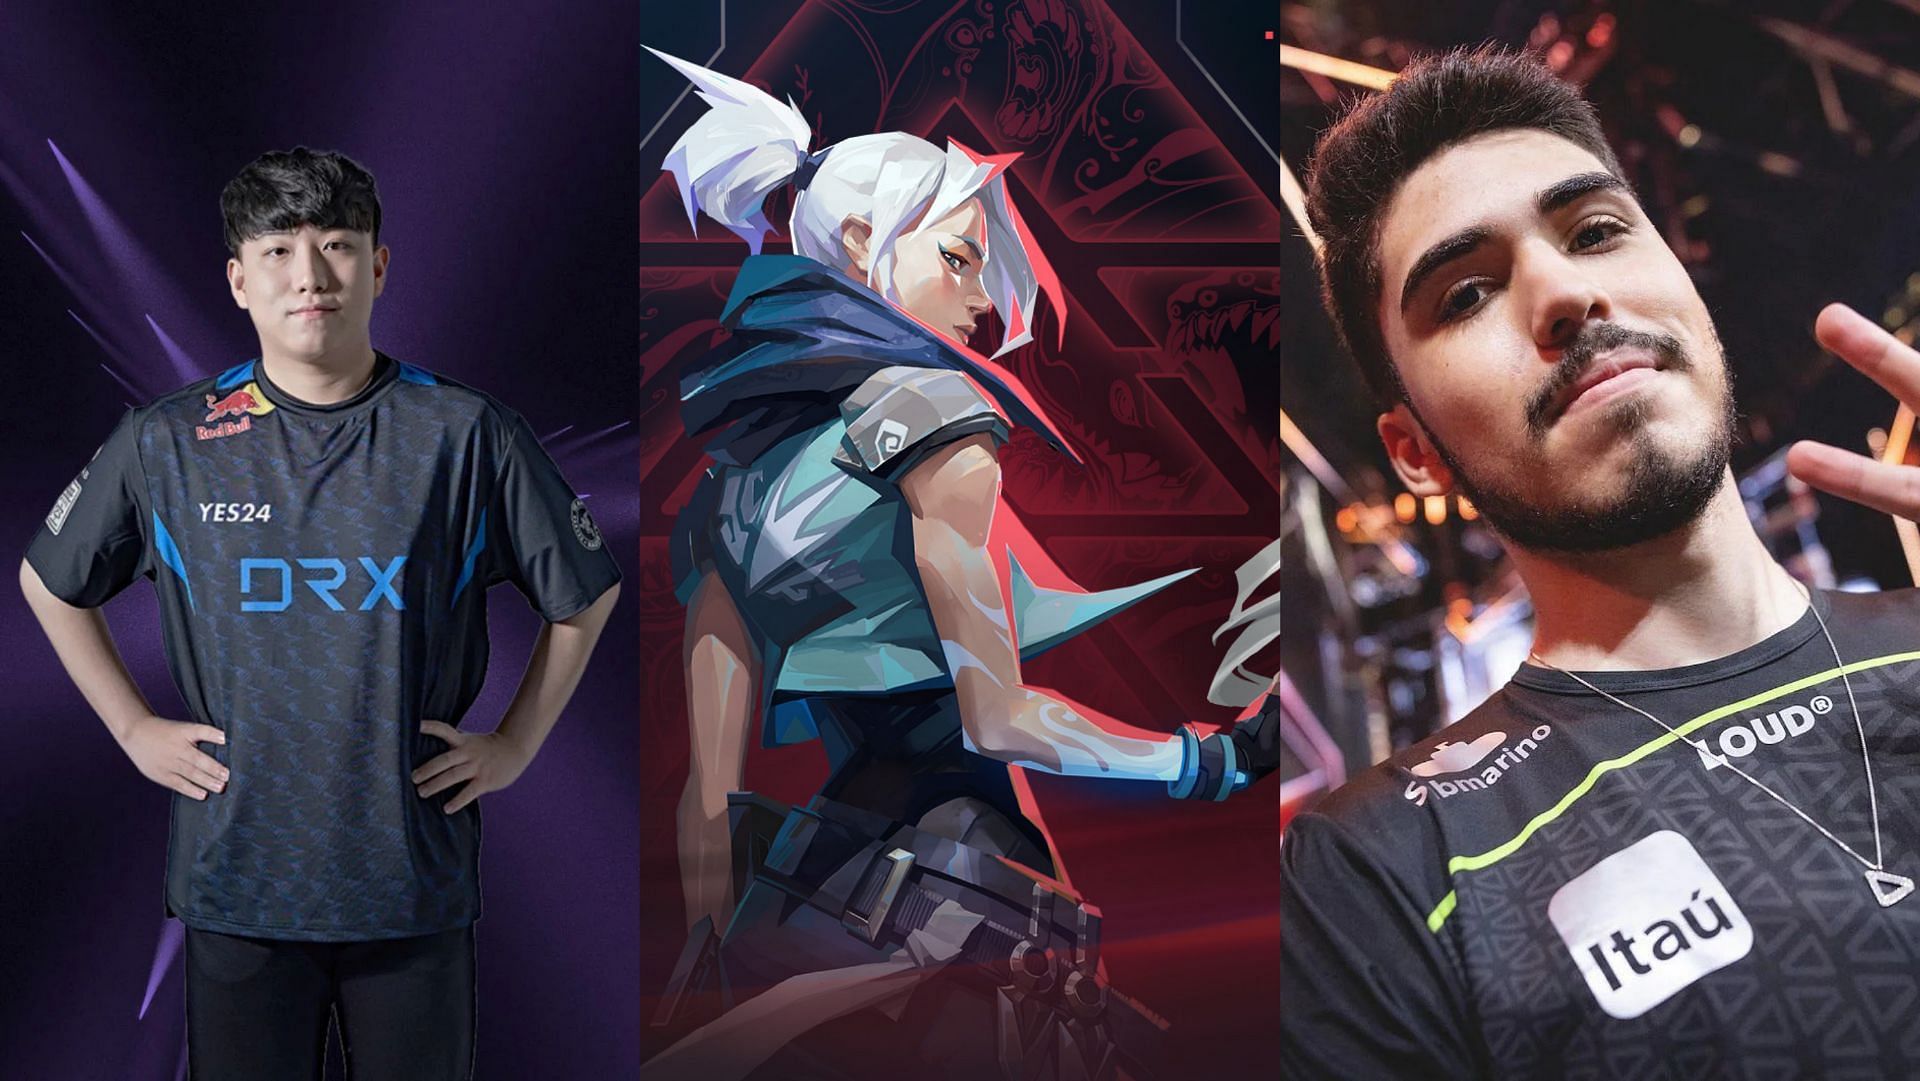 BuZz and Aspas are among the best Jett players in VCT 2022 (Images via Sportskeeda and Riot games)